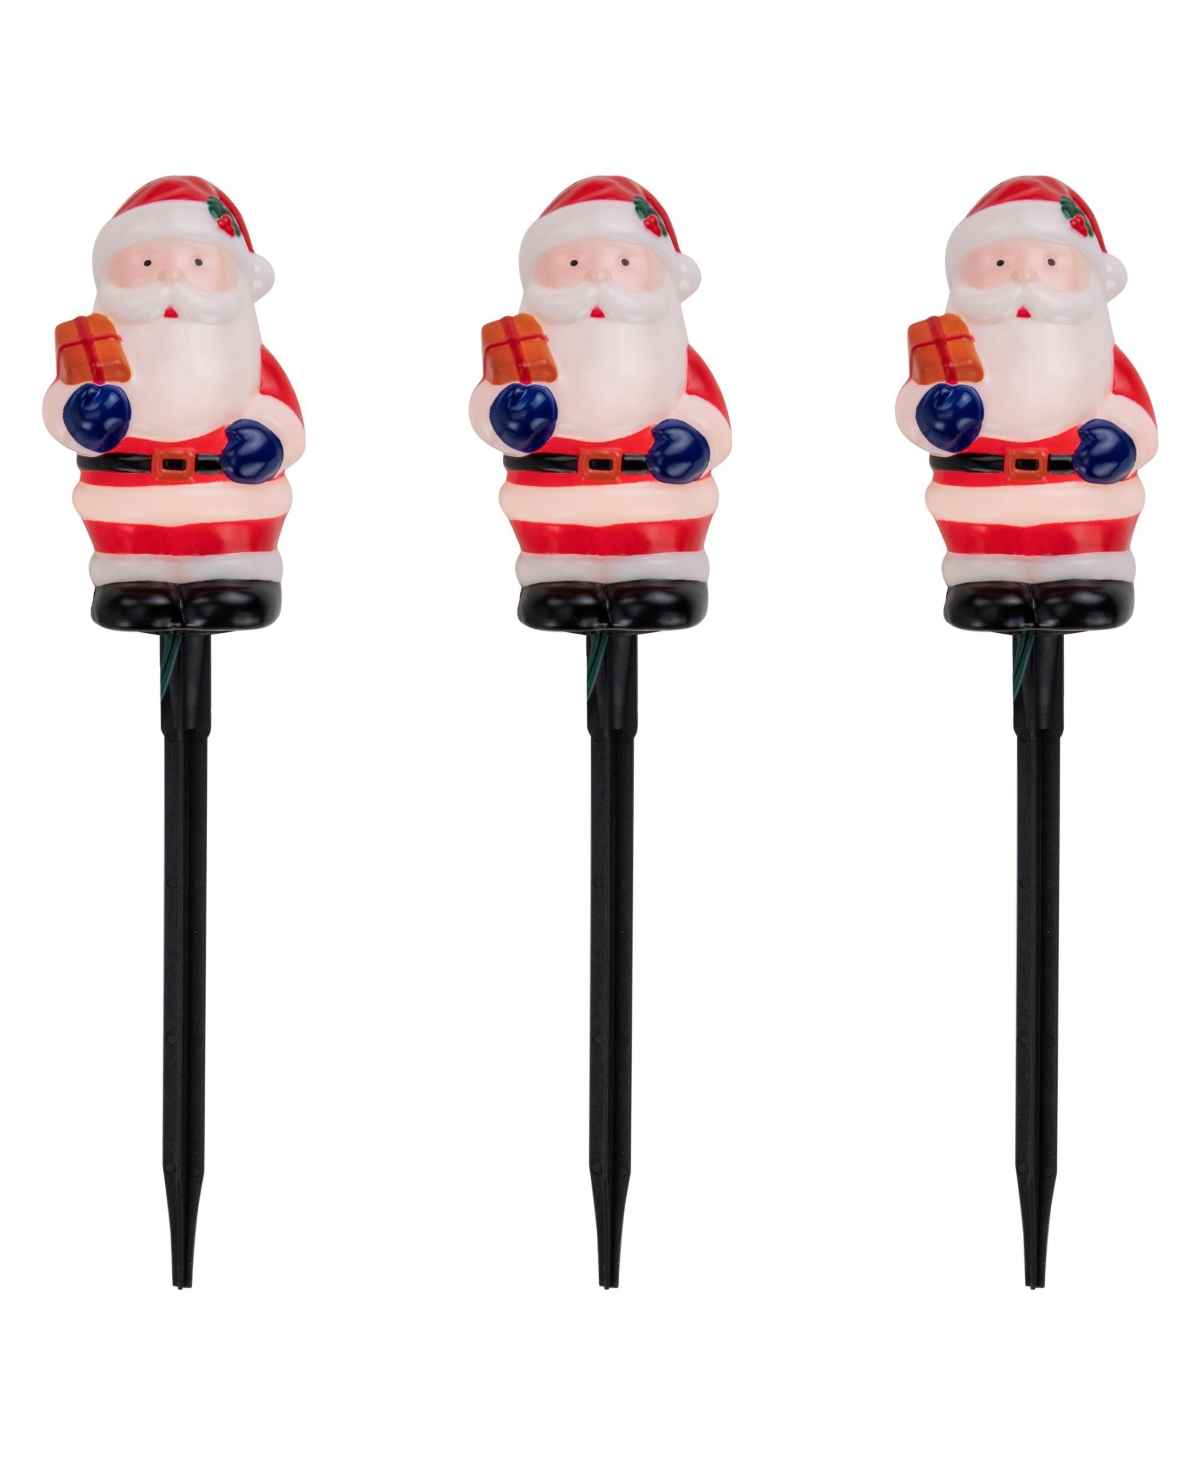 Northlight 16" Lighted Santa Claus Christmas Pathway Markers, Set Of 3 In Red